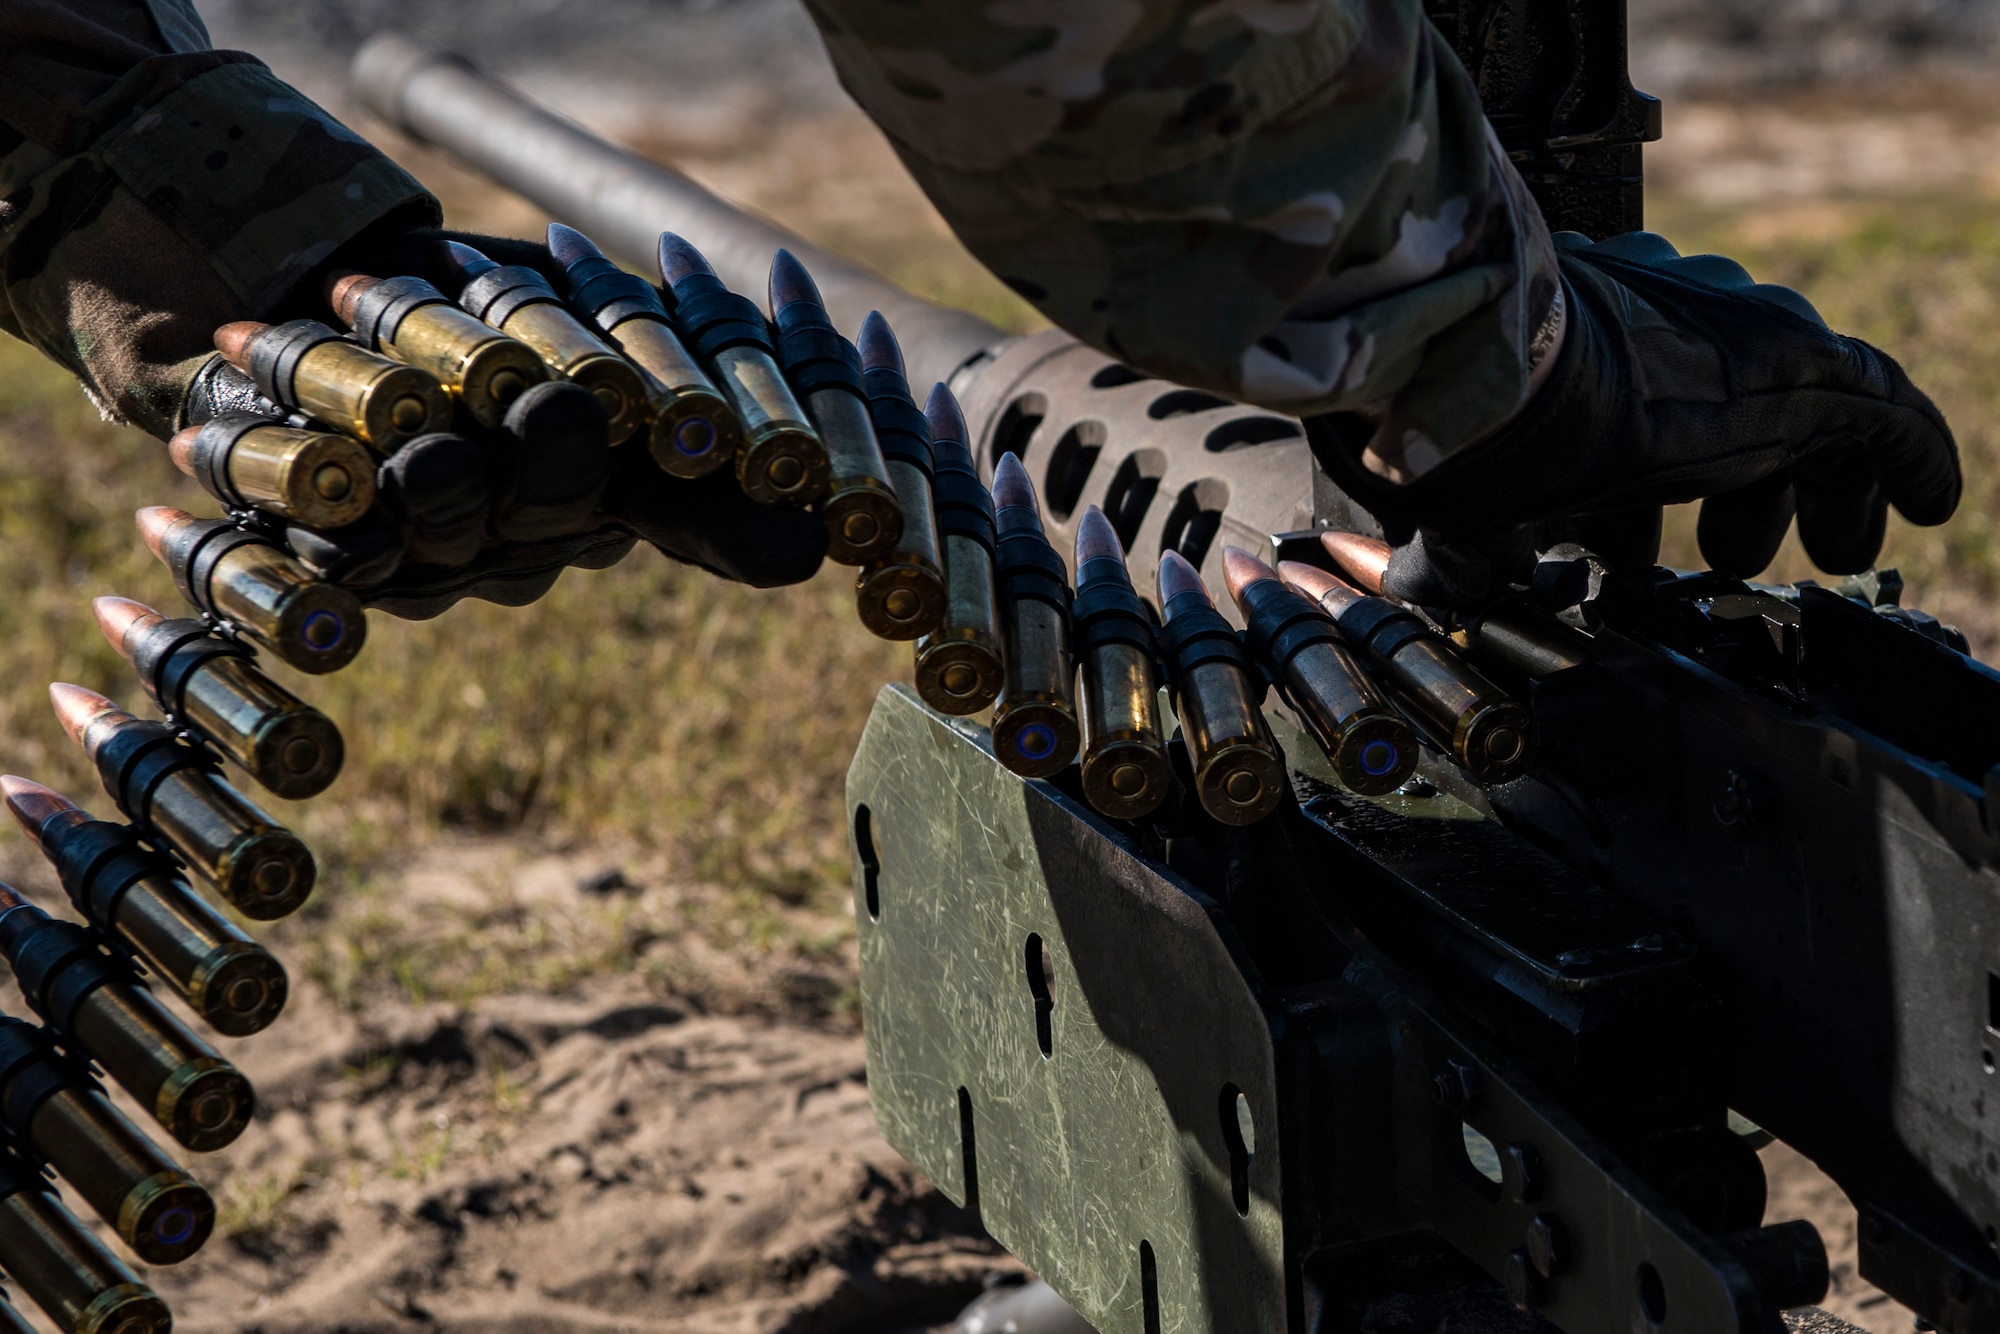 An Airman from the 823d Base Defense Squadron, loads a .50 Caliber M2 machine gun during a heavy weapons qualification, Dec. 13, 2017, at Camp Blanding Joint Training Center, Fla. Airmen shot at targets with the M2 to maintain their proficiency and familiarize themselves with the weapon. (U.S. Air Force photo by Senior Airman Janiqua P. Robinson)